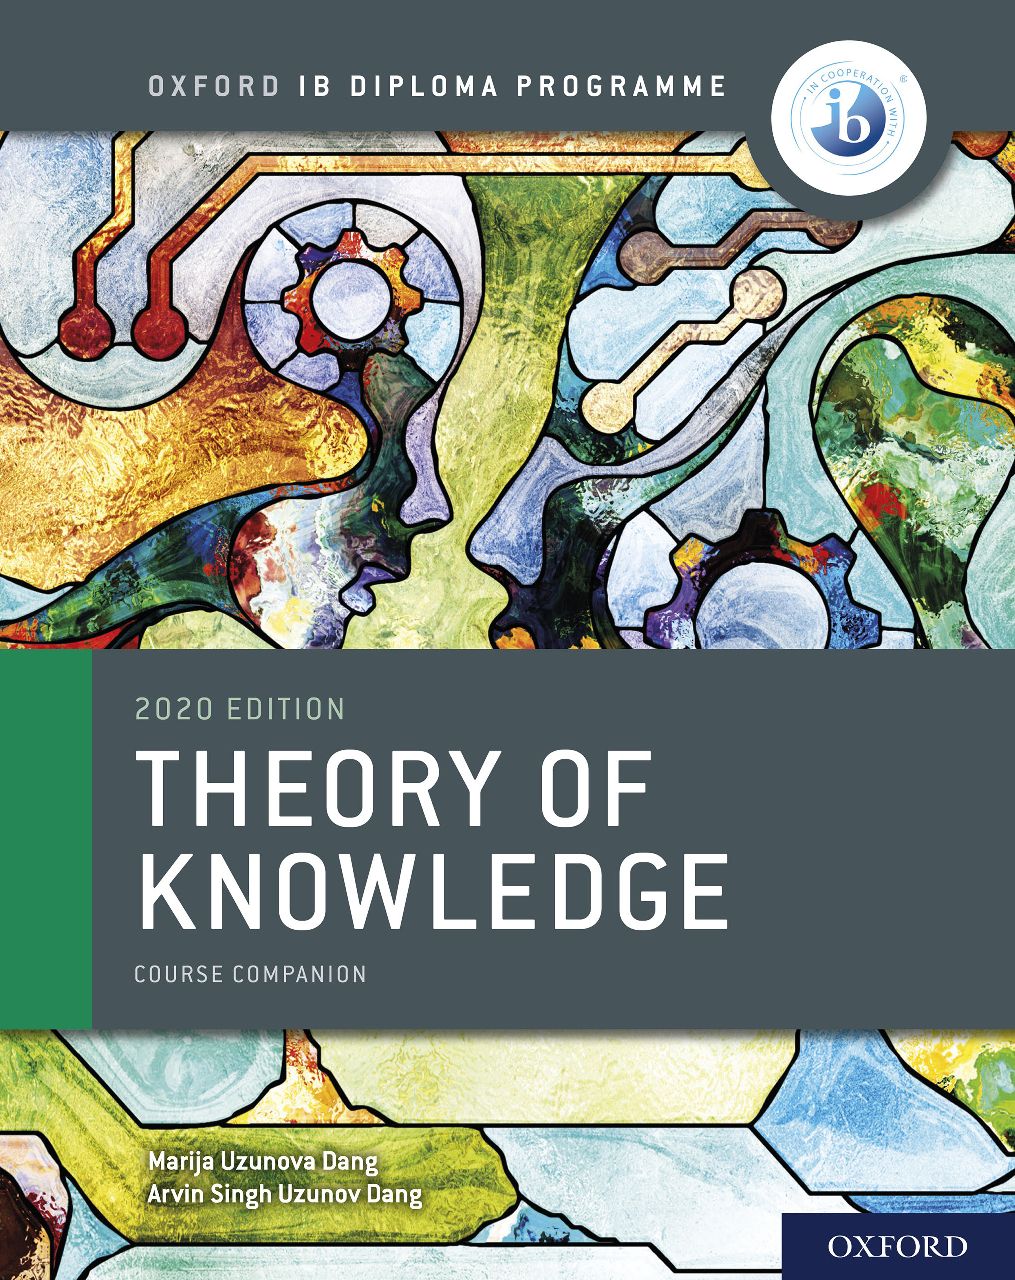 ib theory of knowledge critical thinking